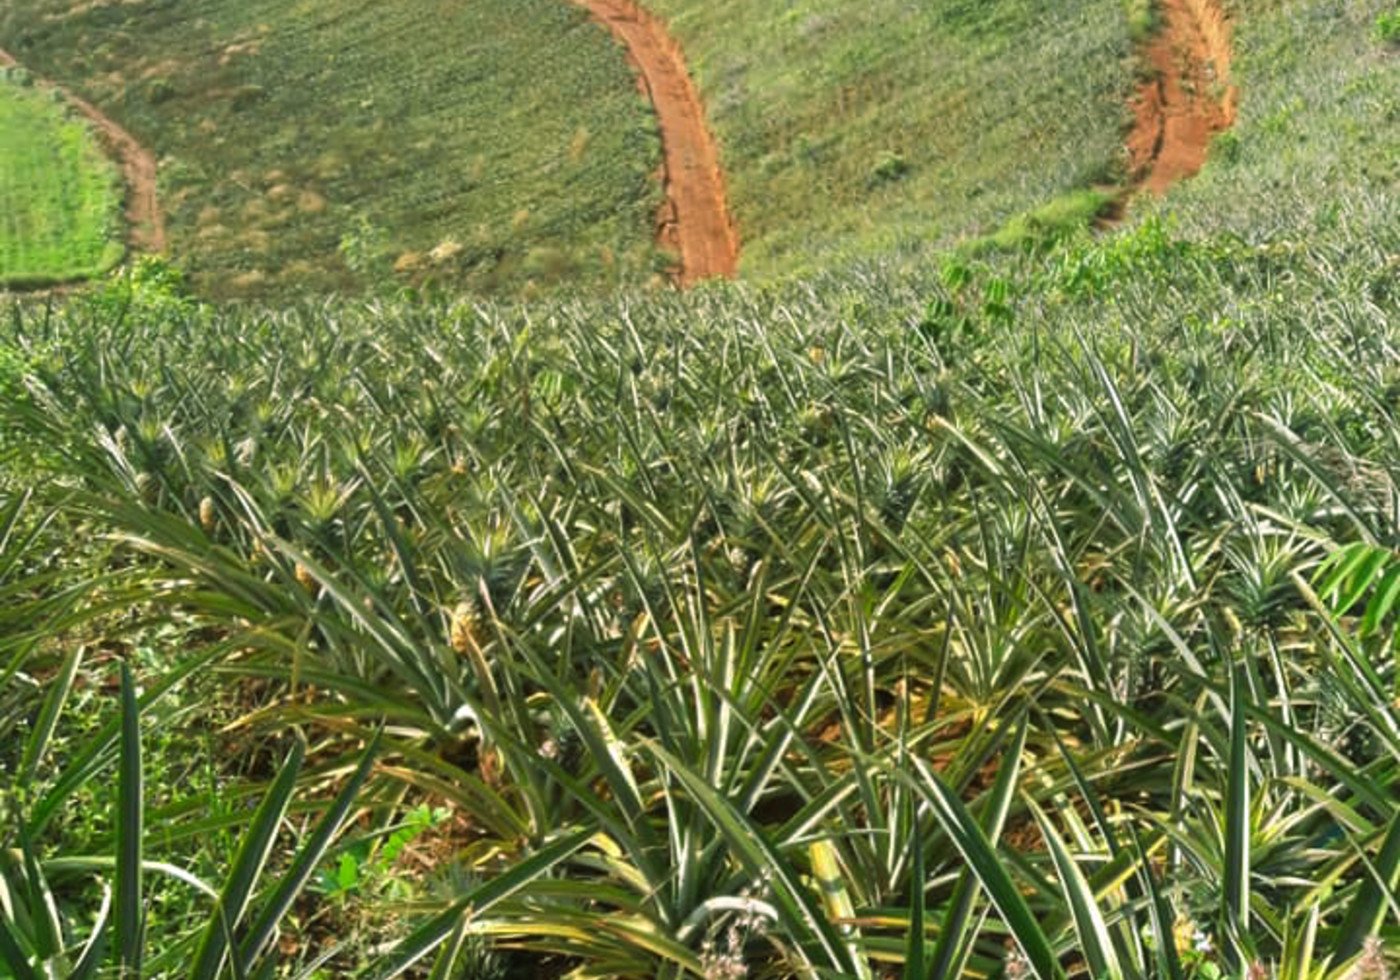 Overview over a pineapple farm